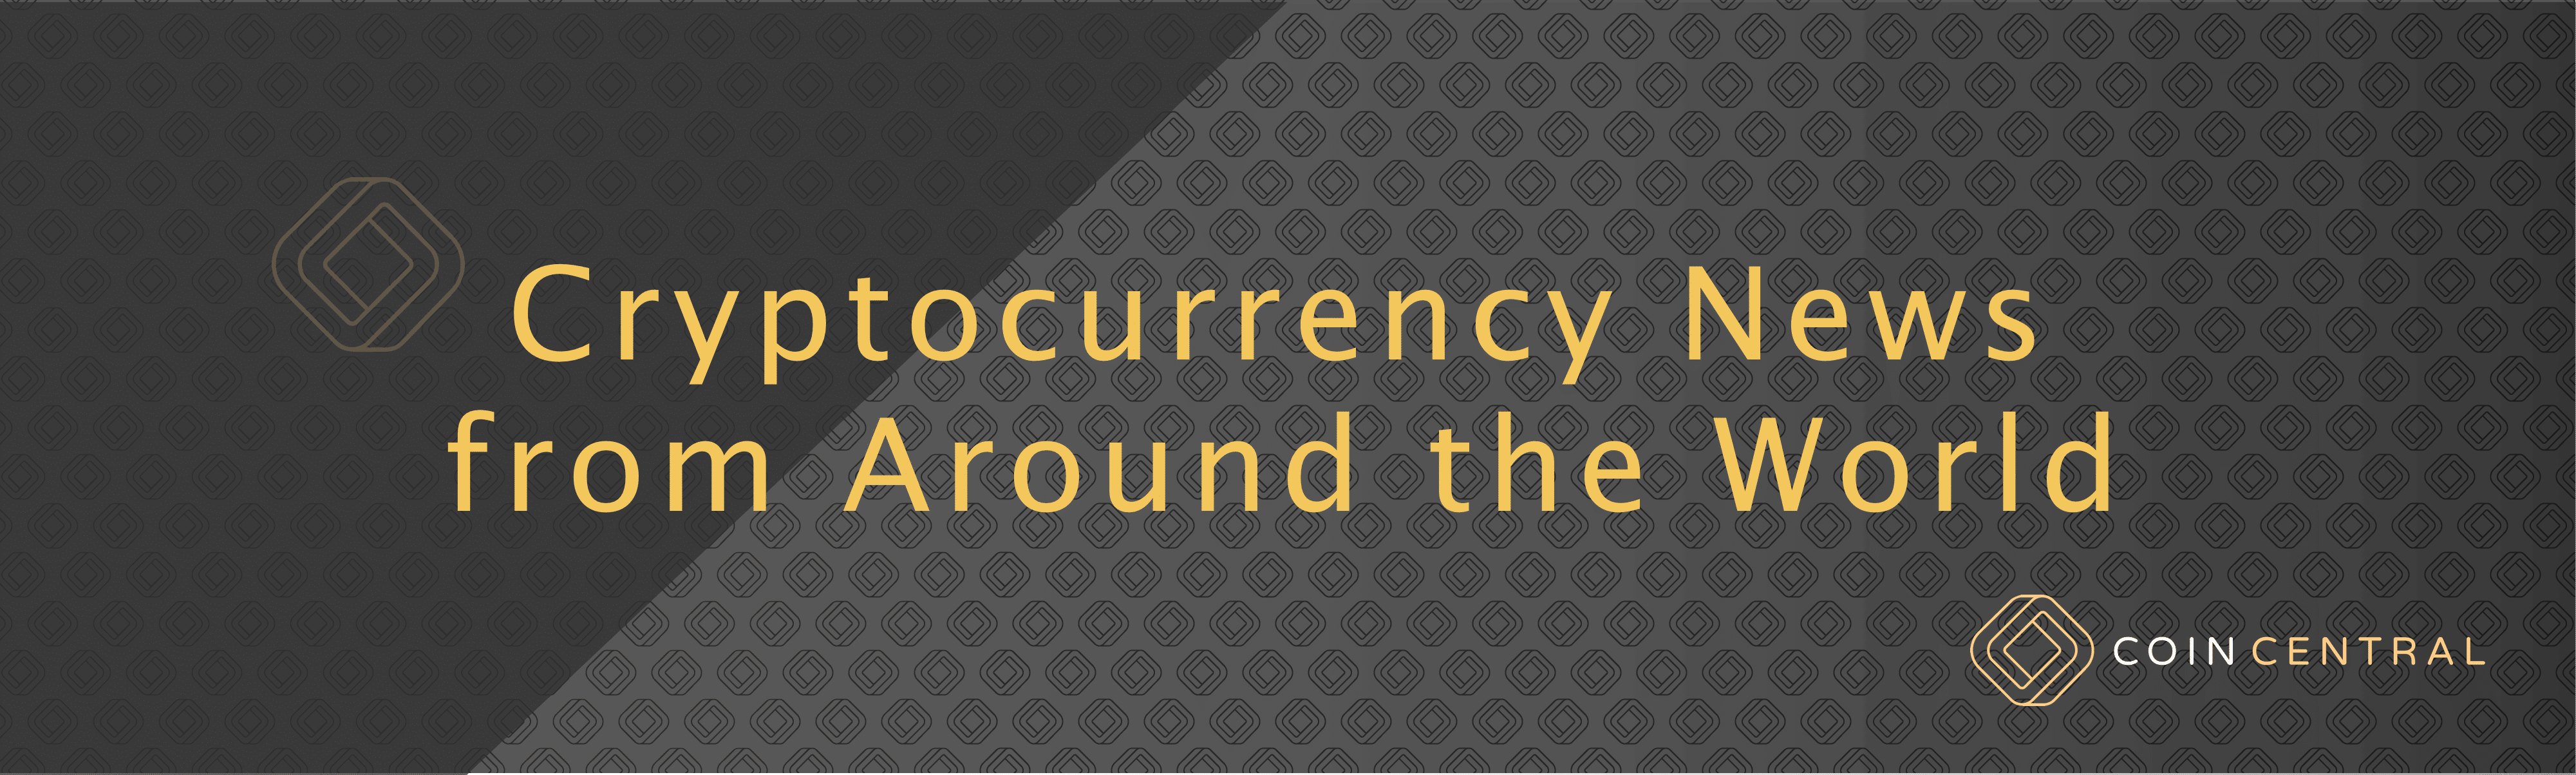 Cryptocurrency News from Around the World